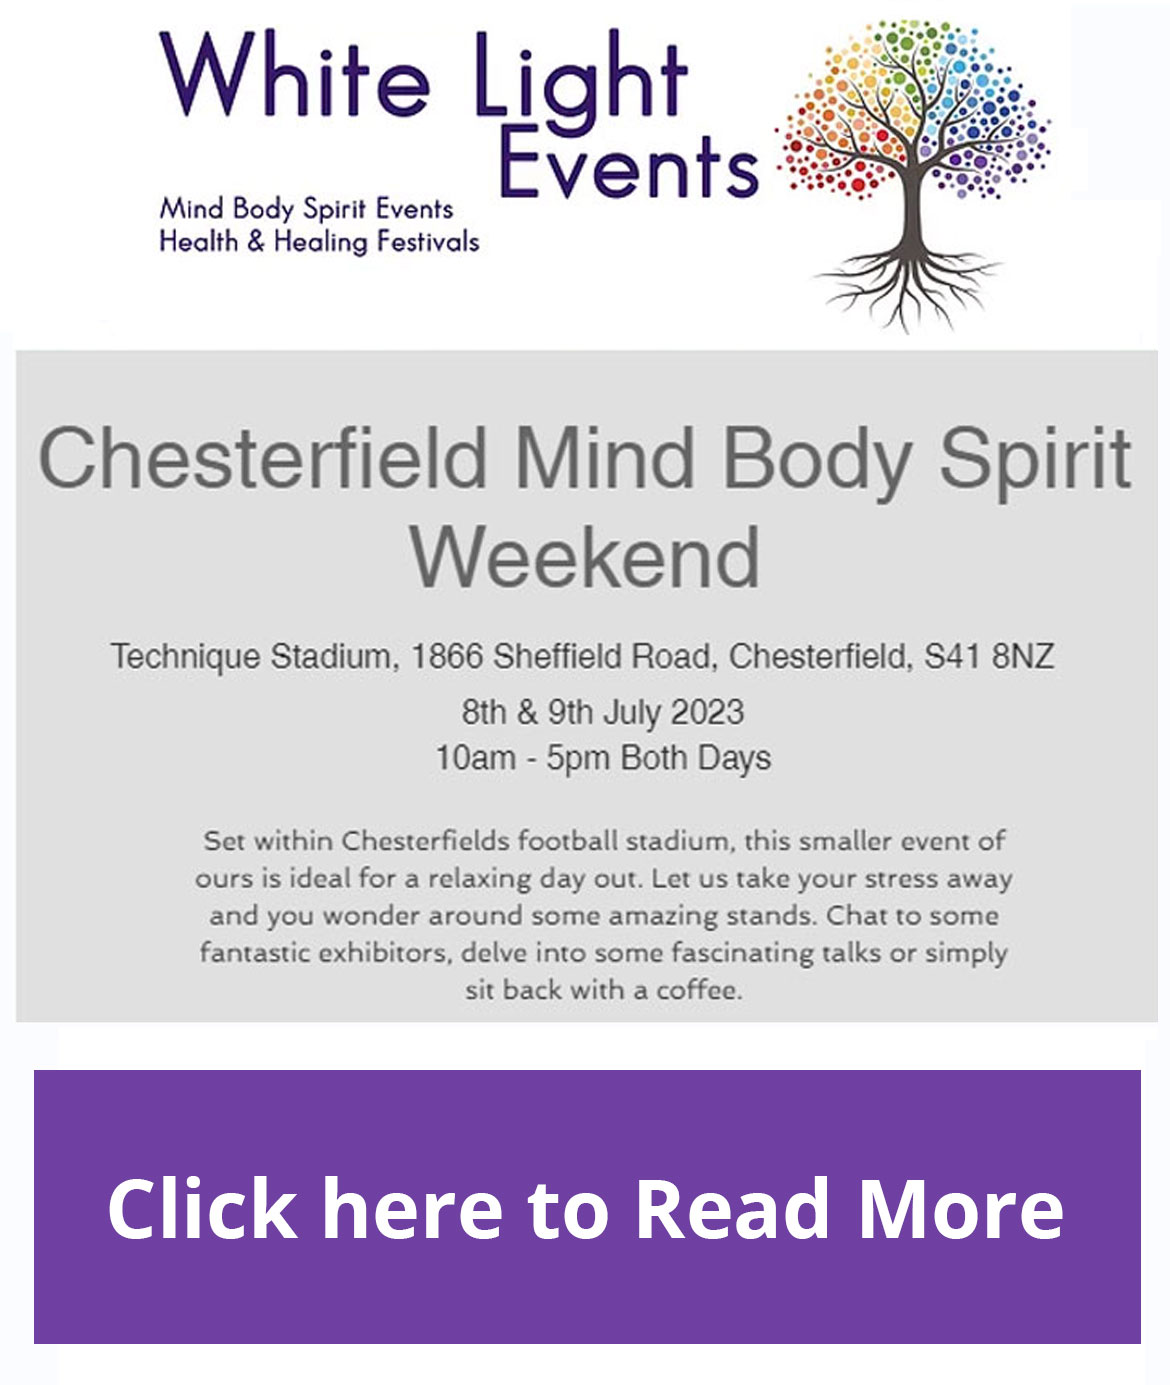 Chesterfield Mind Body Spirit Weekend - 8th July / 9th July